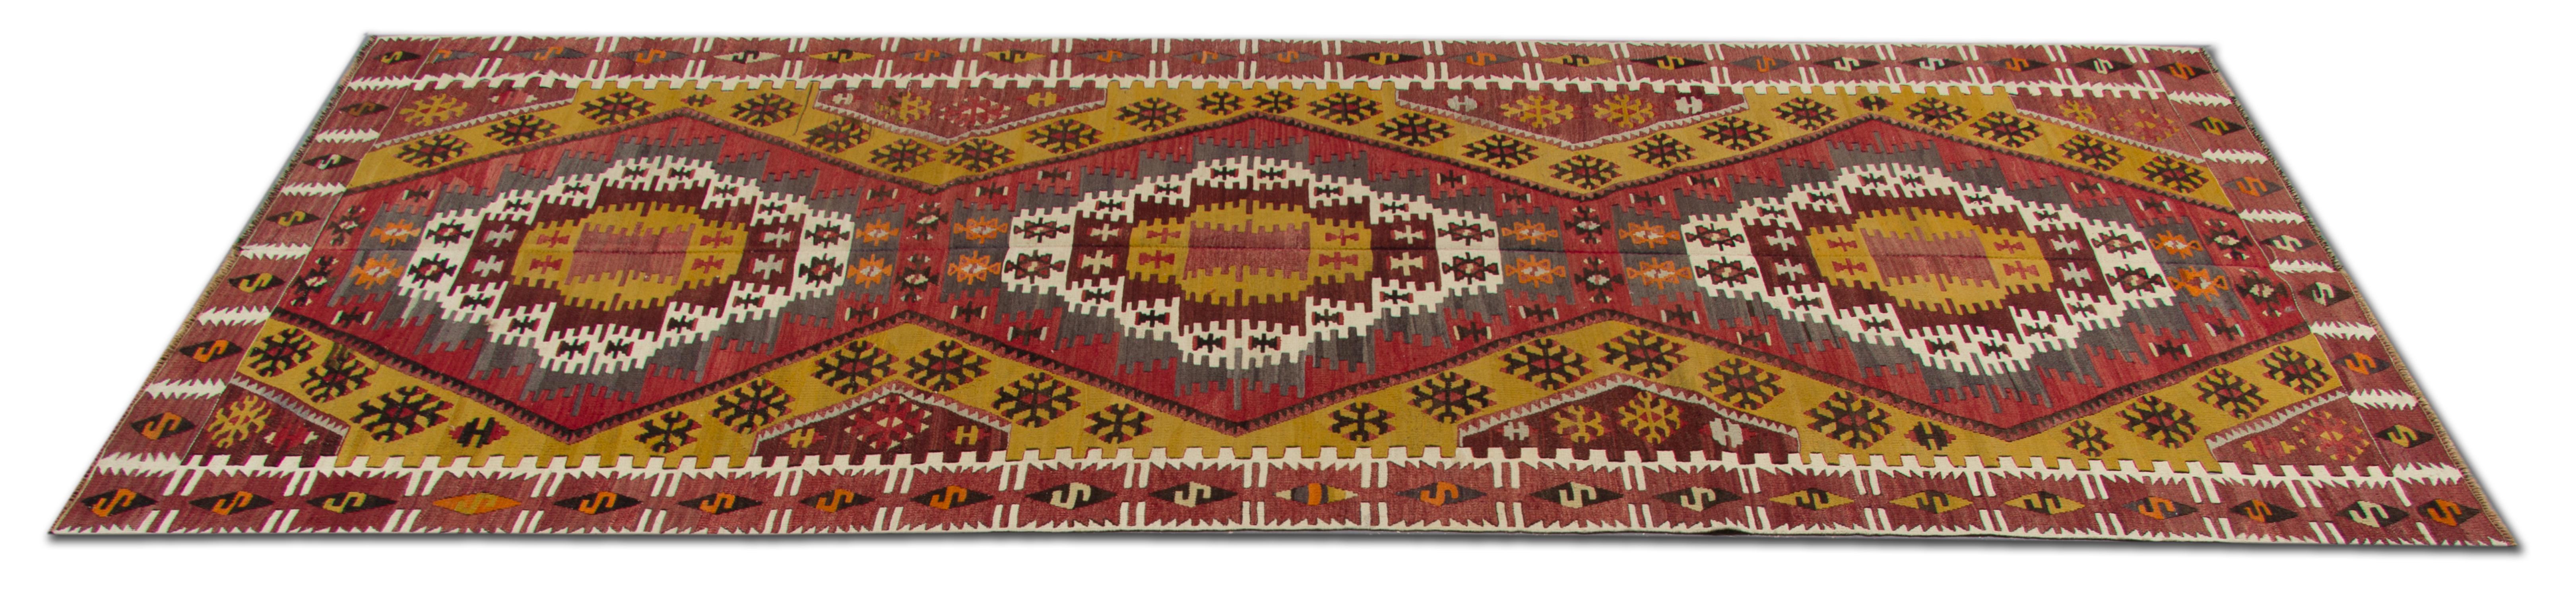 Konya is located in the heart of Turkey, workshop kilims of Konya are mostly known for their distinctive geometric designs. These handmade carpet Antique rug traditional handwoven runner rugs come from the rug world in a striking colour combination